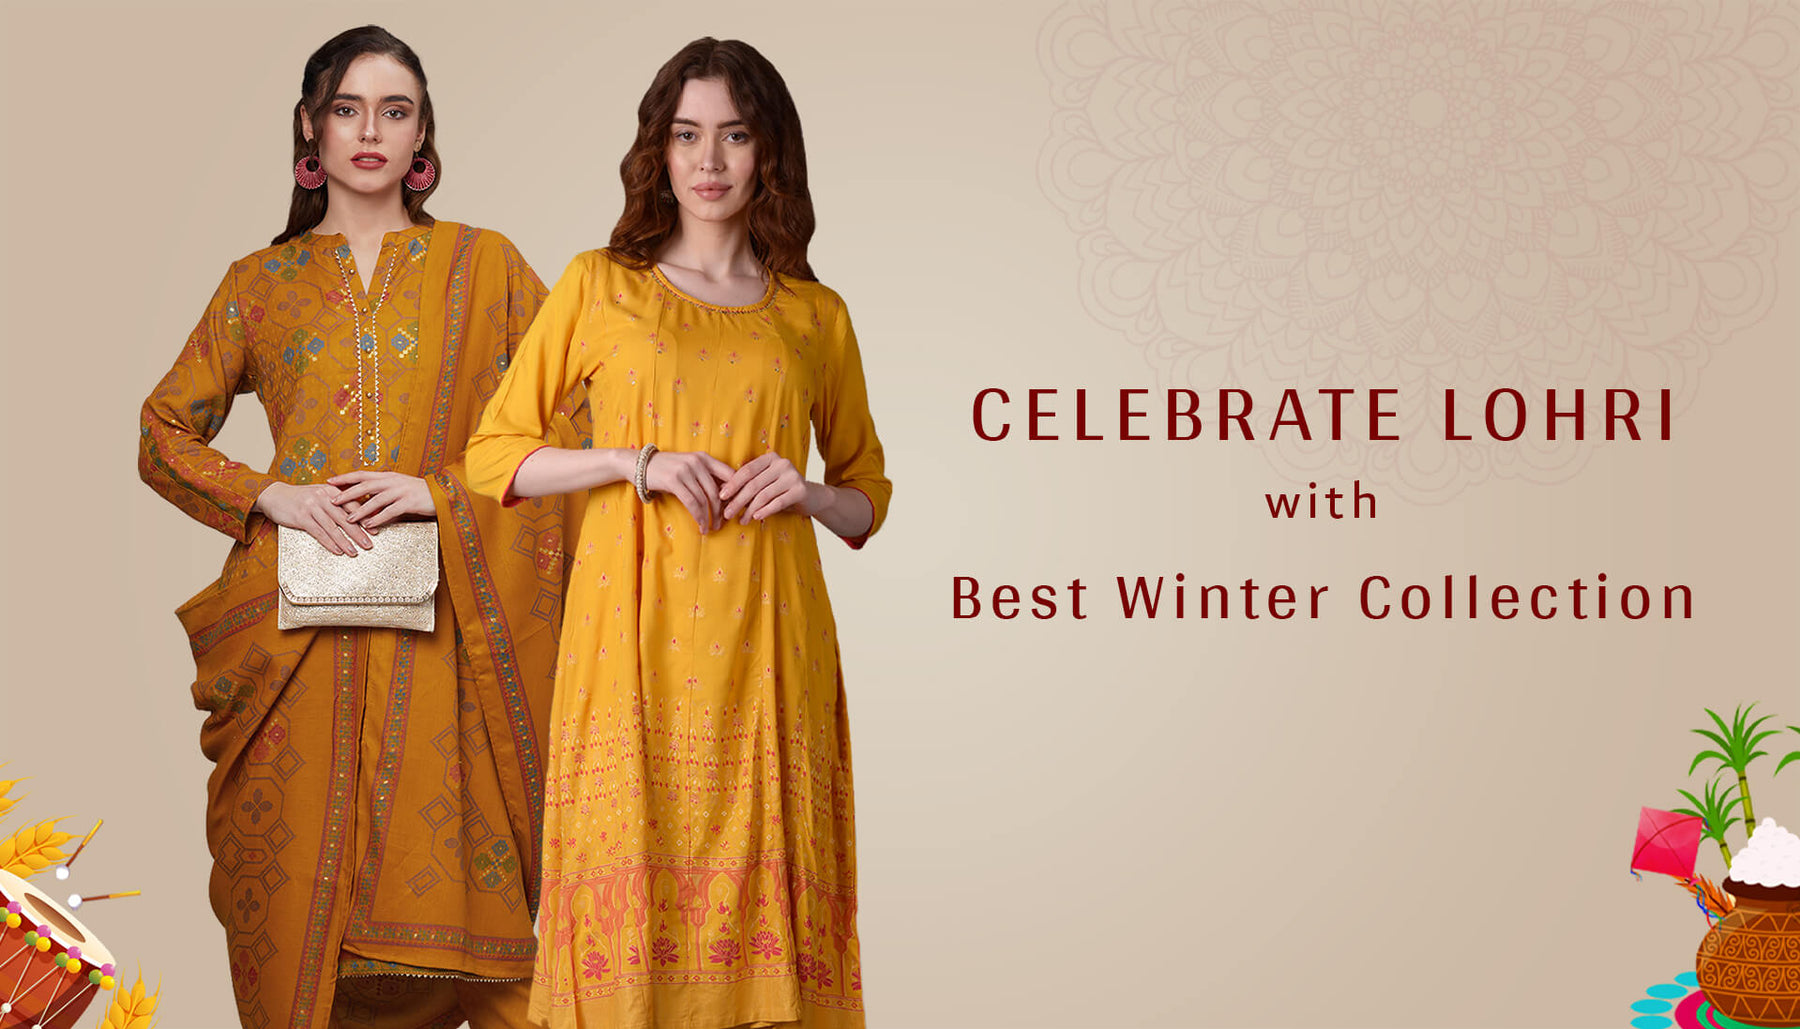 Celebrate Lohri with the Best Winter Collection from Shree